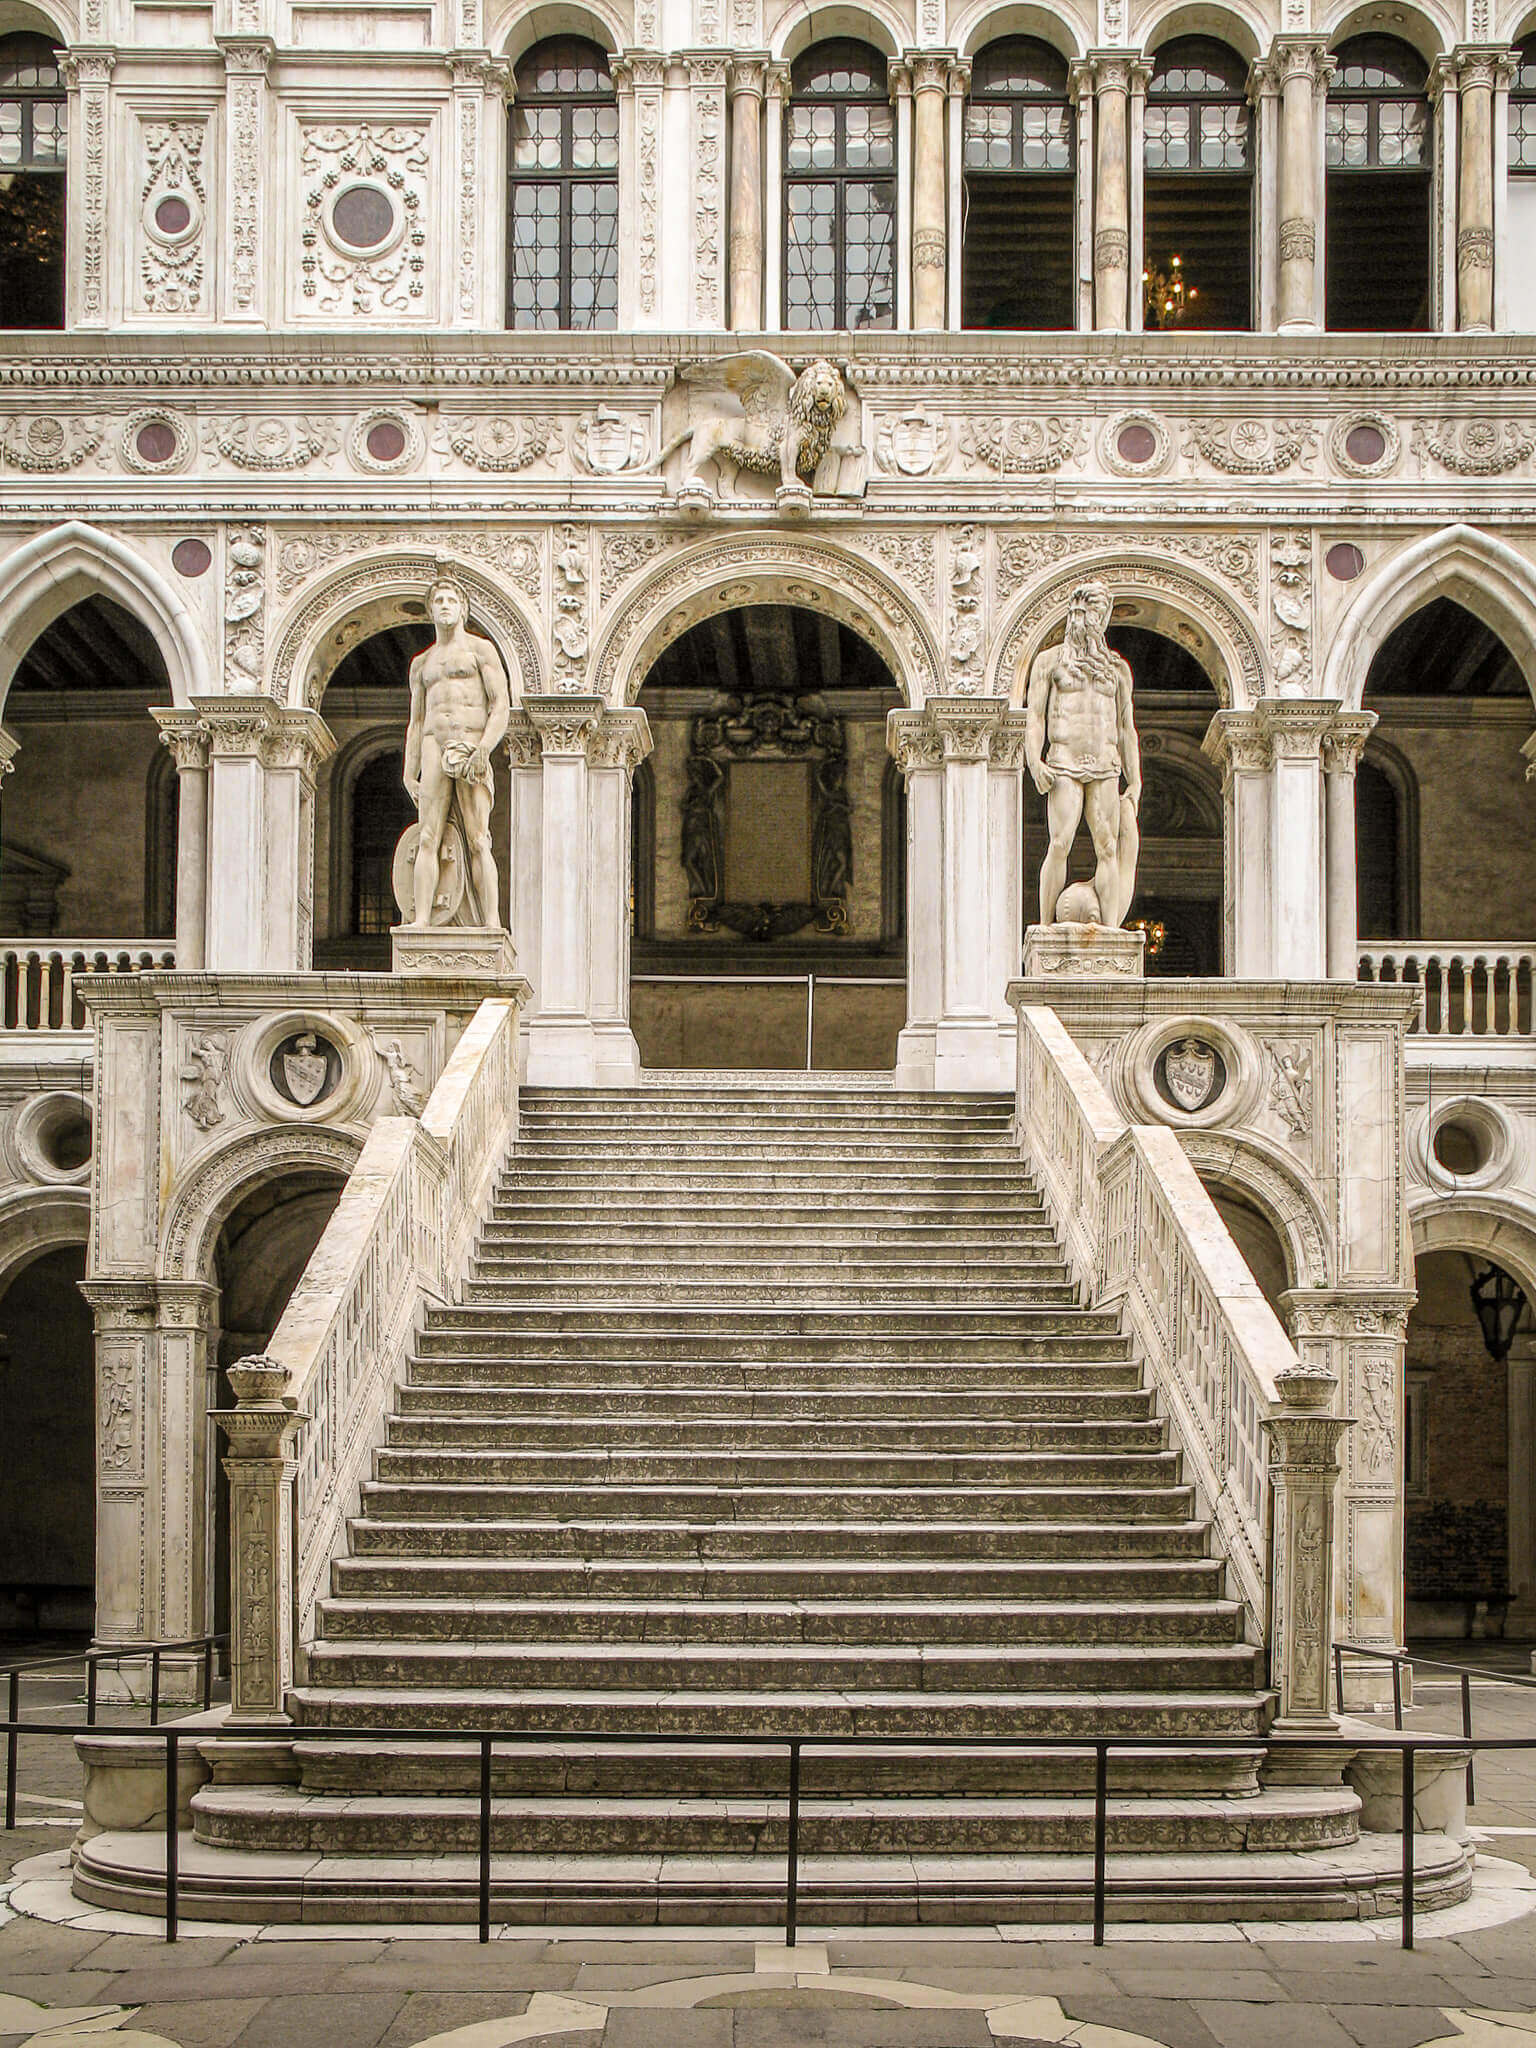 The Staircase of Giants in the courtyard of the Palazzo Ducale